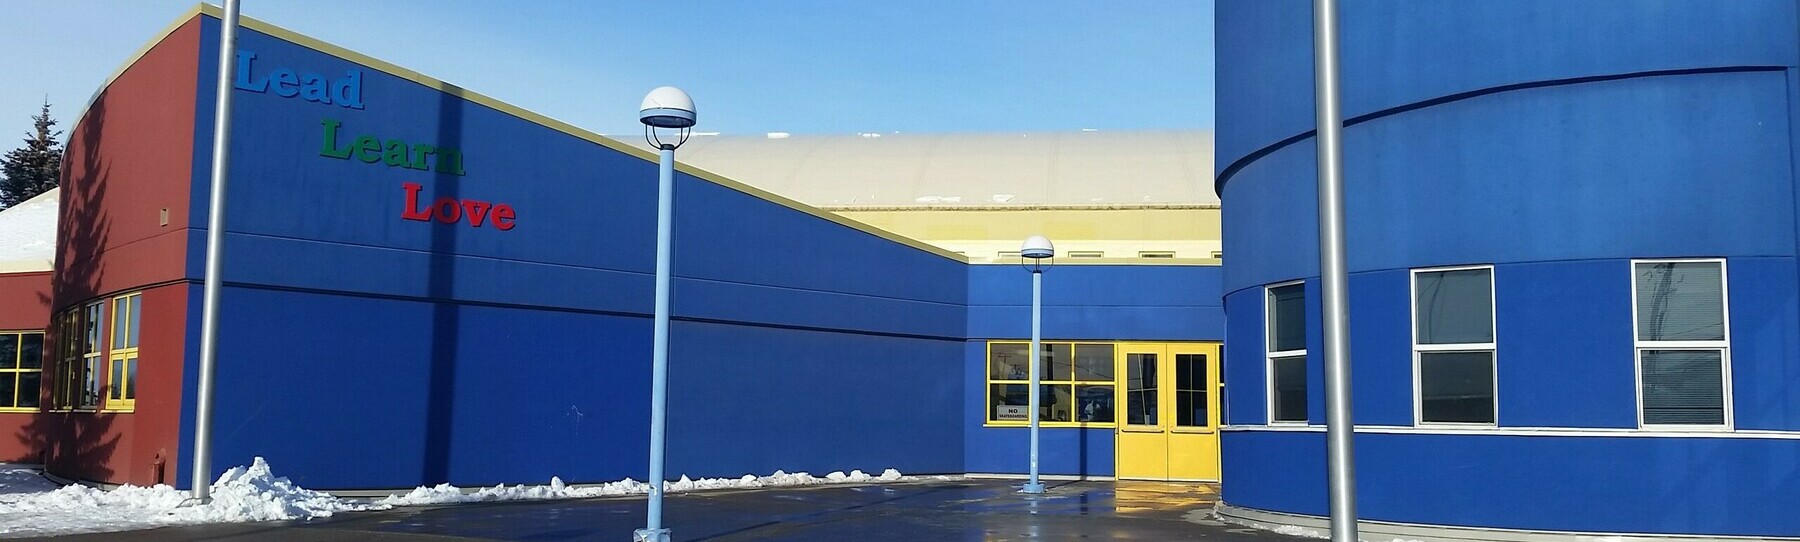 image of the exterior entrance to Wheatland Elementary